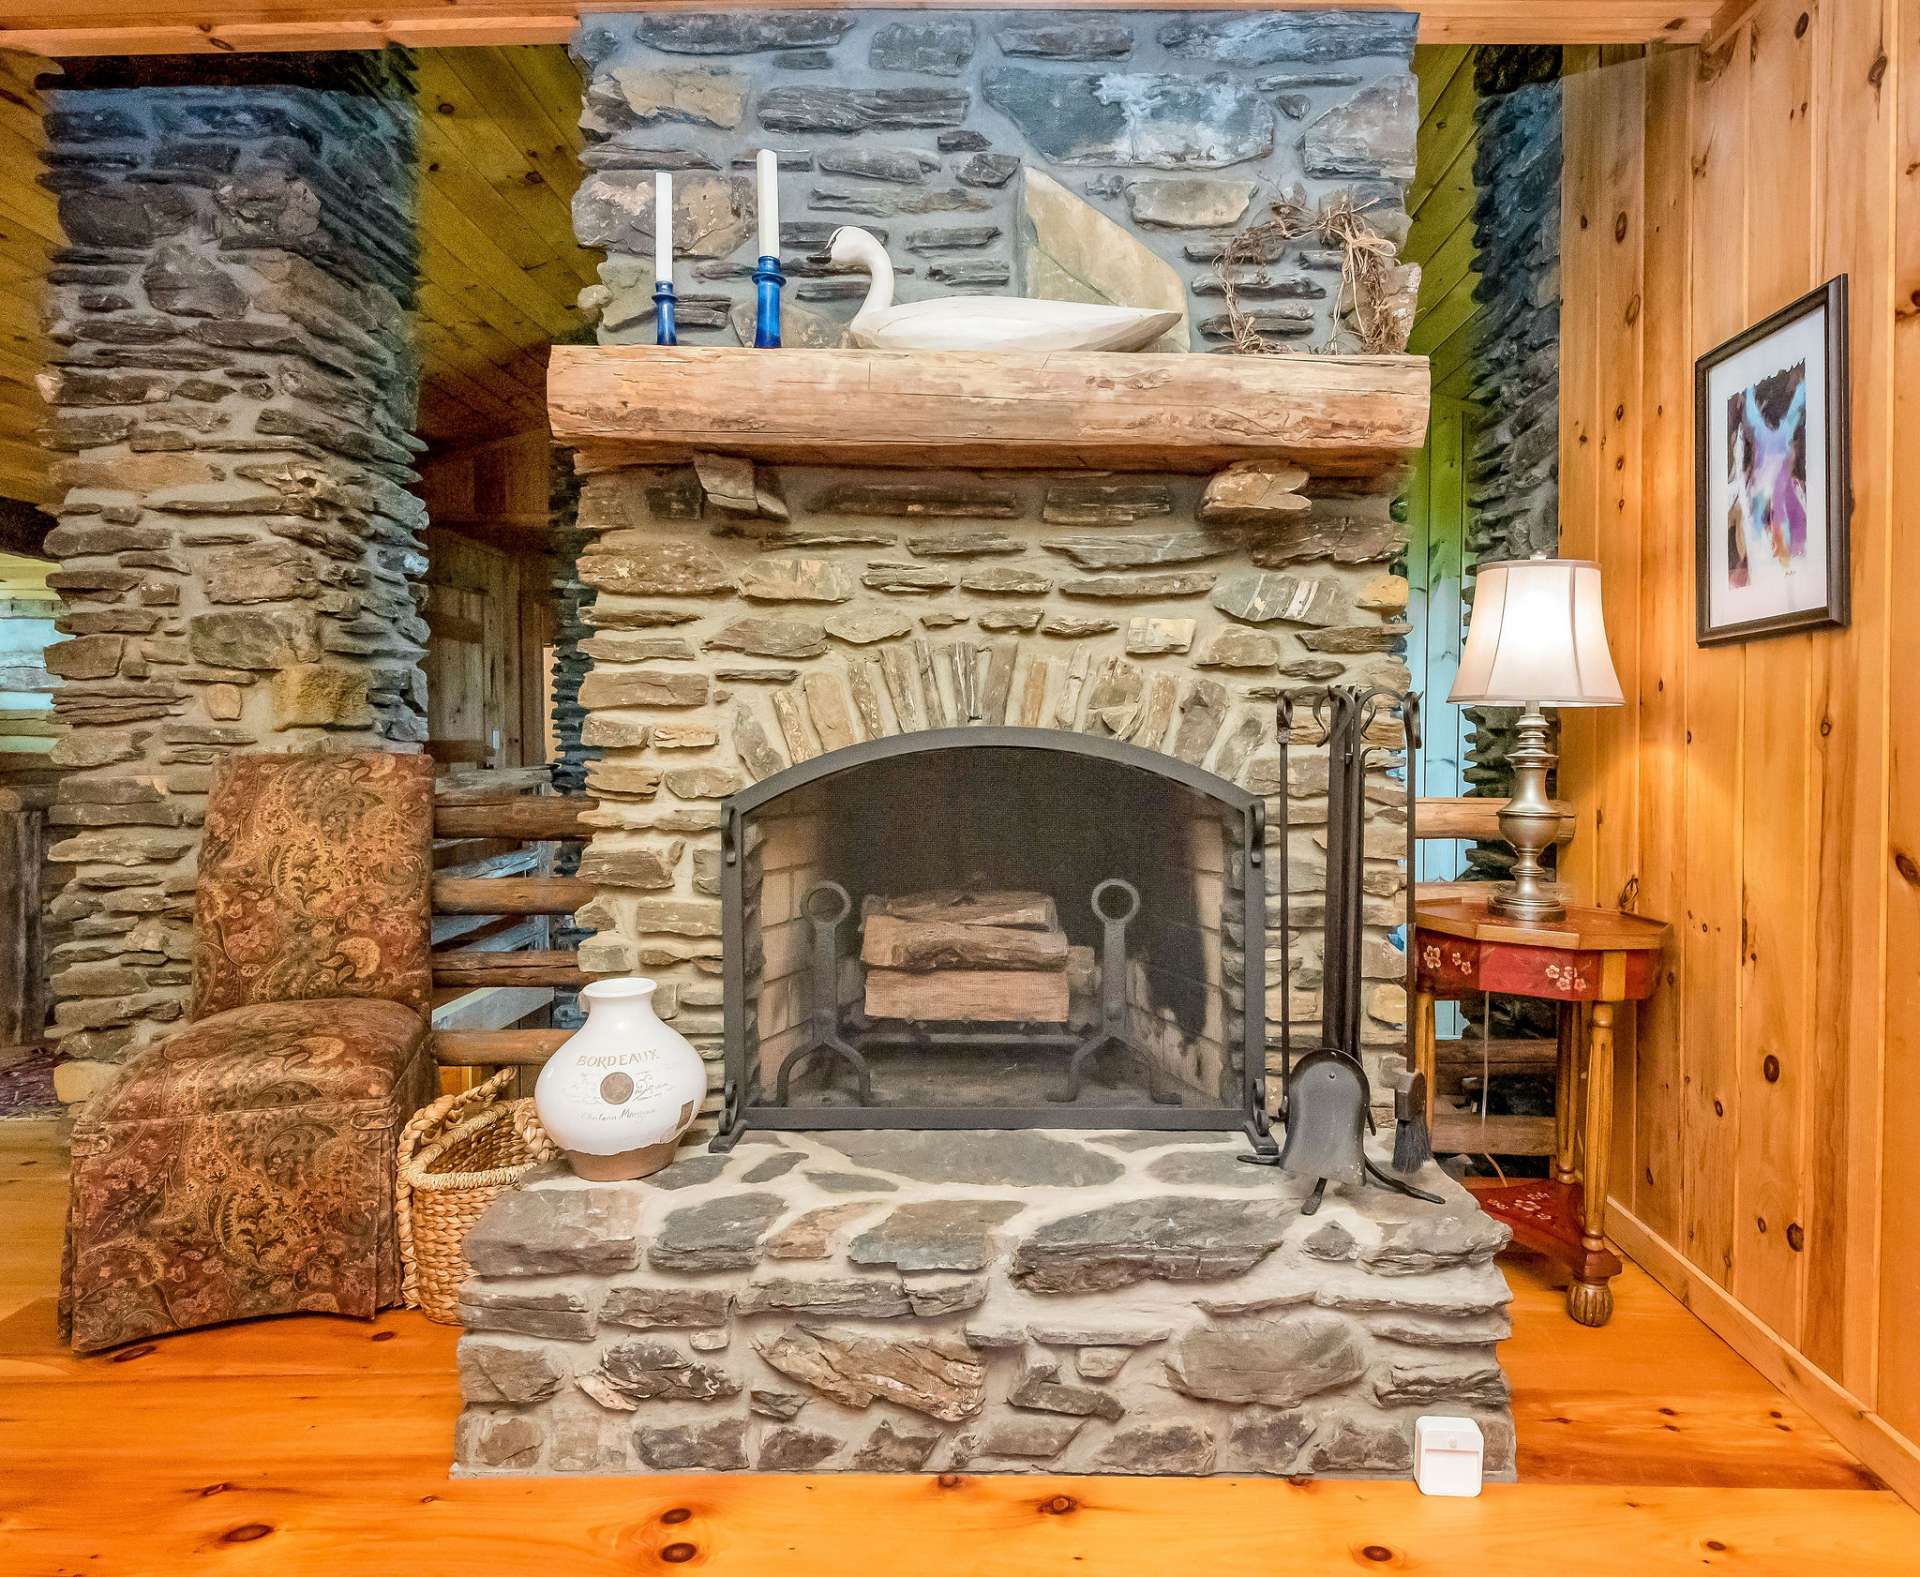 Sitting area is accentuated by another stone, wood-burning fireplace.